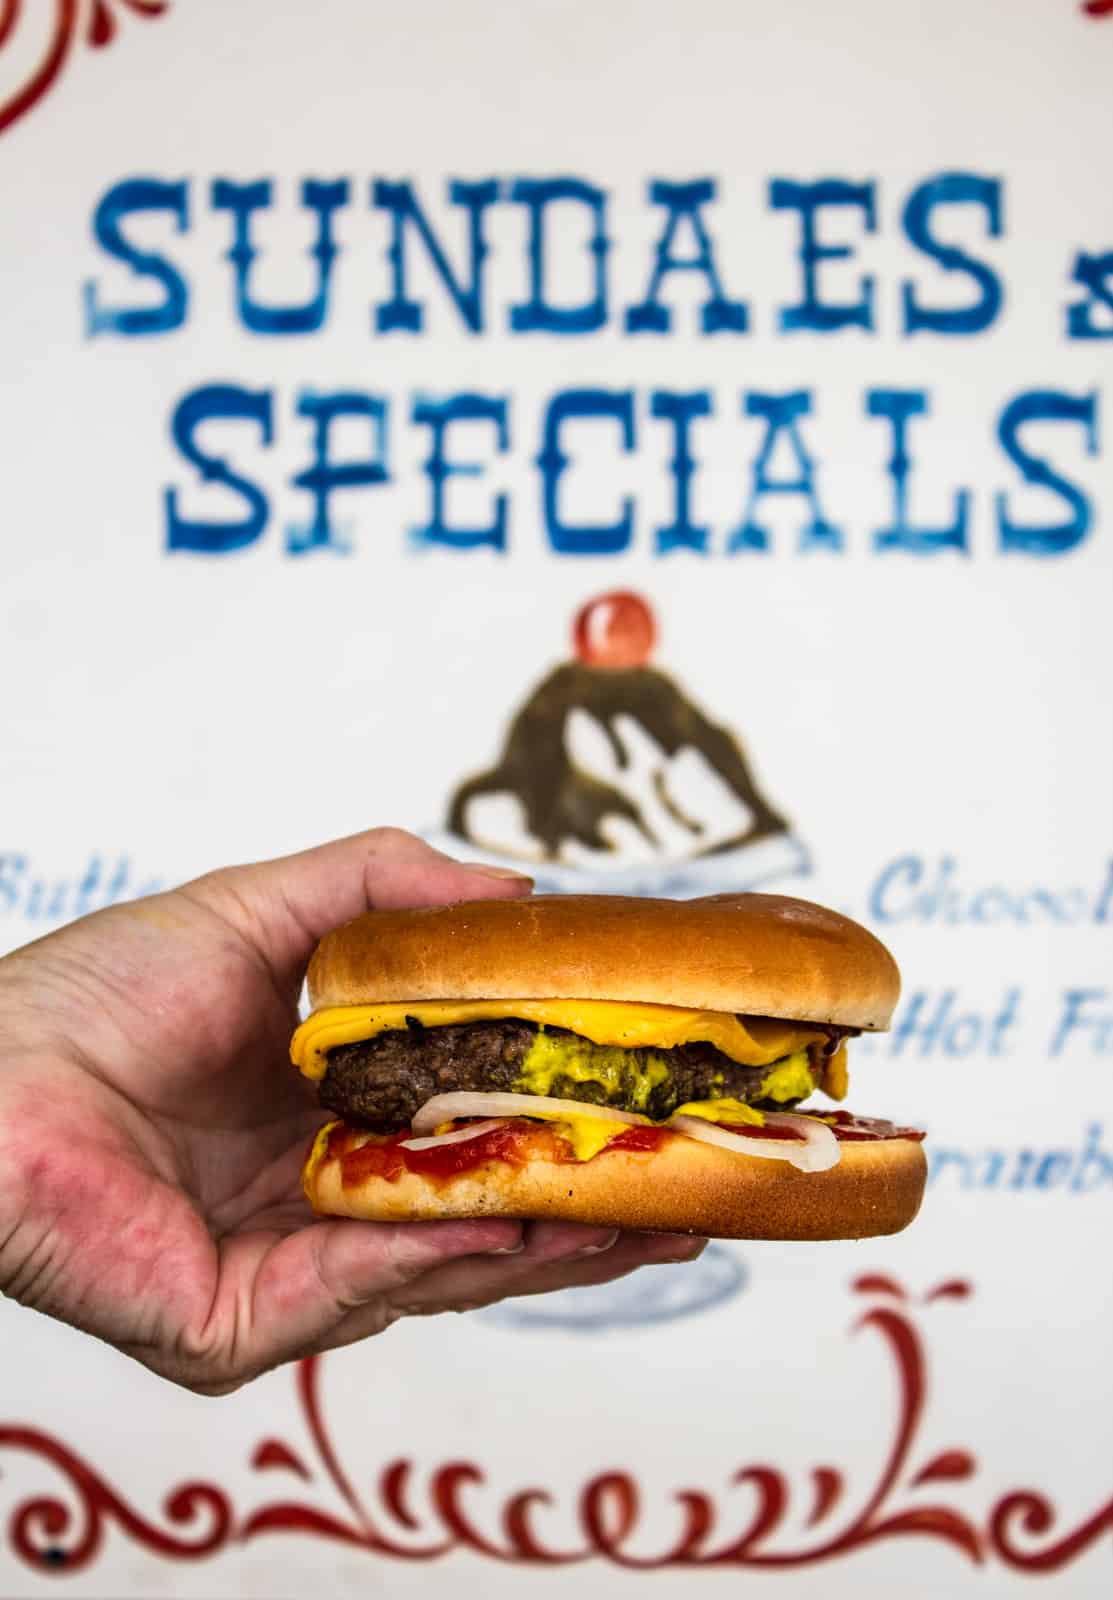 Read our list of the 20 best burgers in Milwaukee for local burger recommendations from classic to artisanal to wildly inventive burgers!